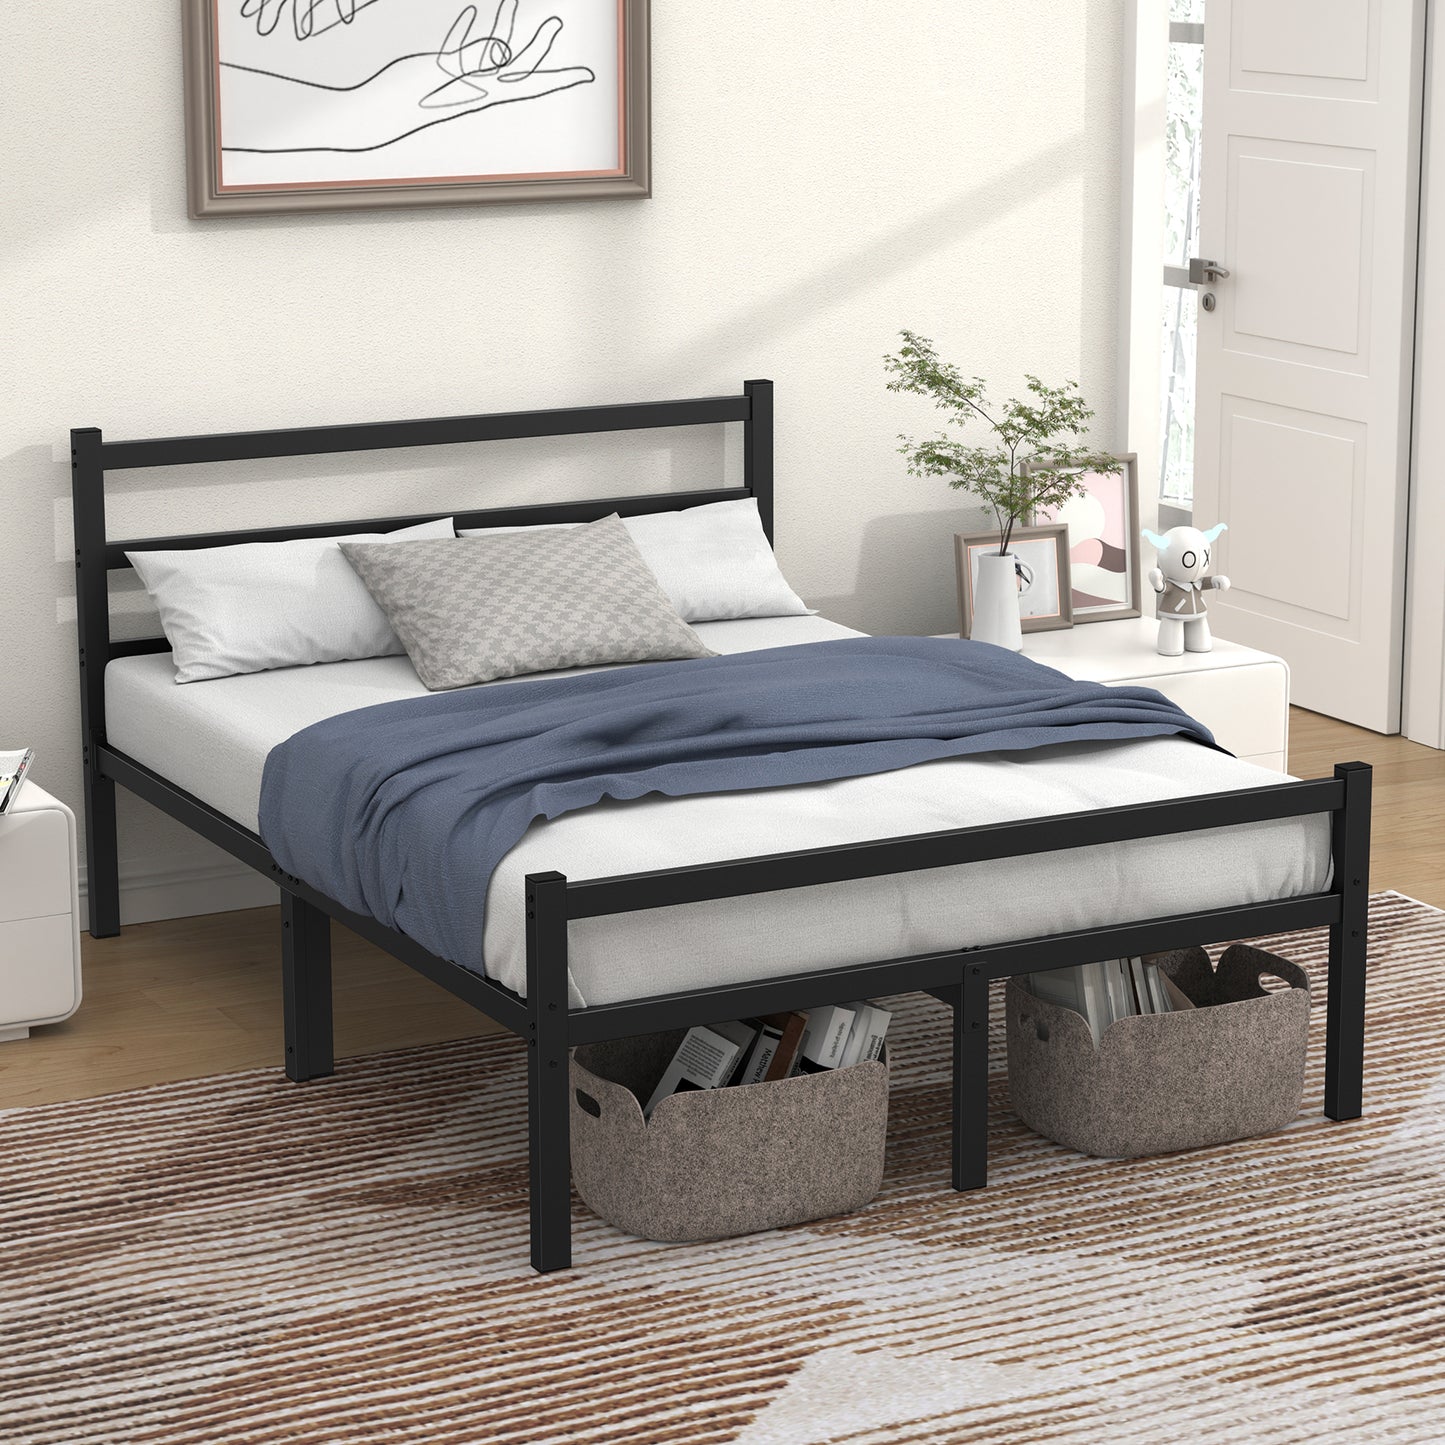 Mr IRONSTONE Full Bed Frame, 14" High Full Size Metal Platform Bed Frame with Headboard and Footboard with Storage, No Box Spring Needed, Black